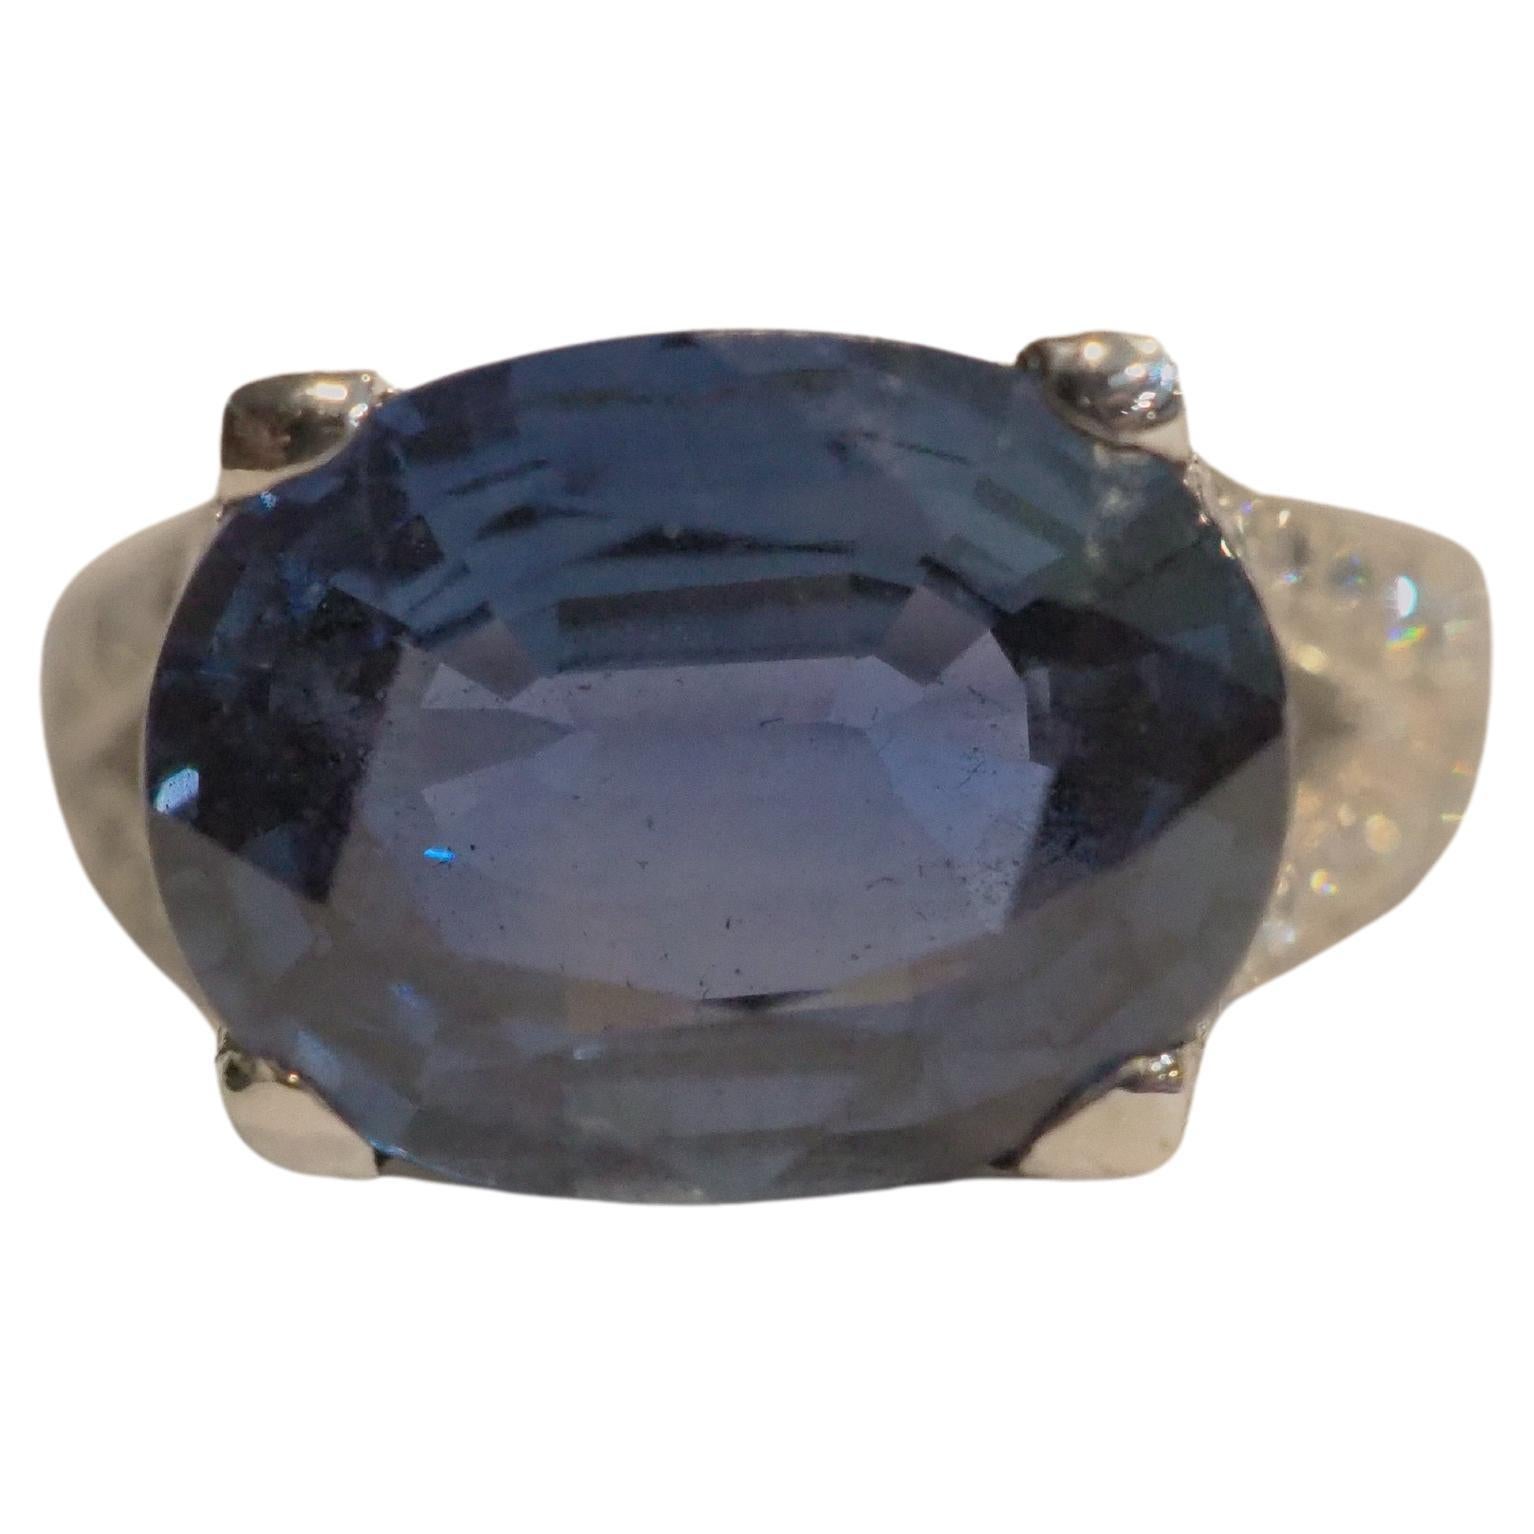 This beautiful cocktail split shank ring boasts a very stunning eye clean blue sapphire of decent size! The sapphire is an oval cut and is very clear with good saturation of blue color. Very rare sapphire color. There are 84 round melee diamonds